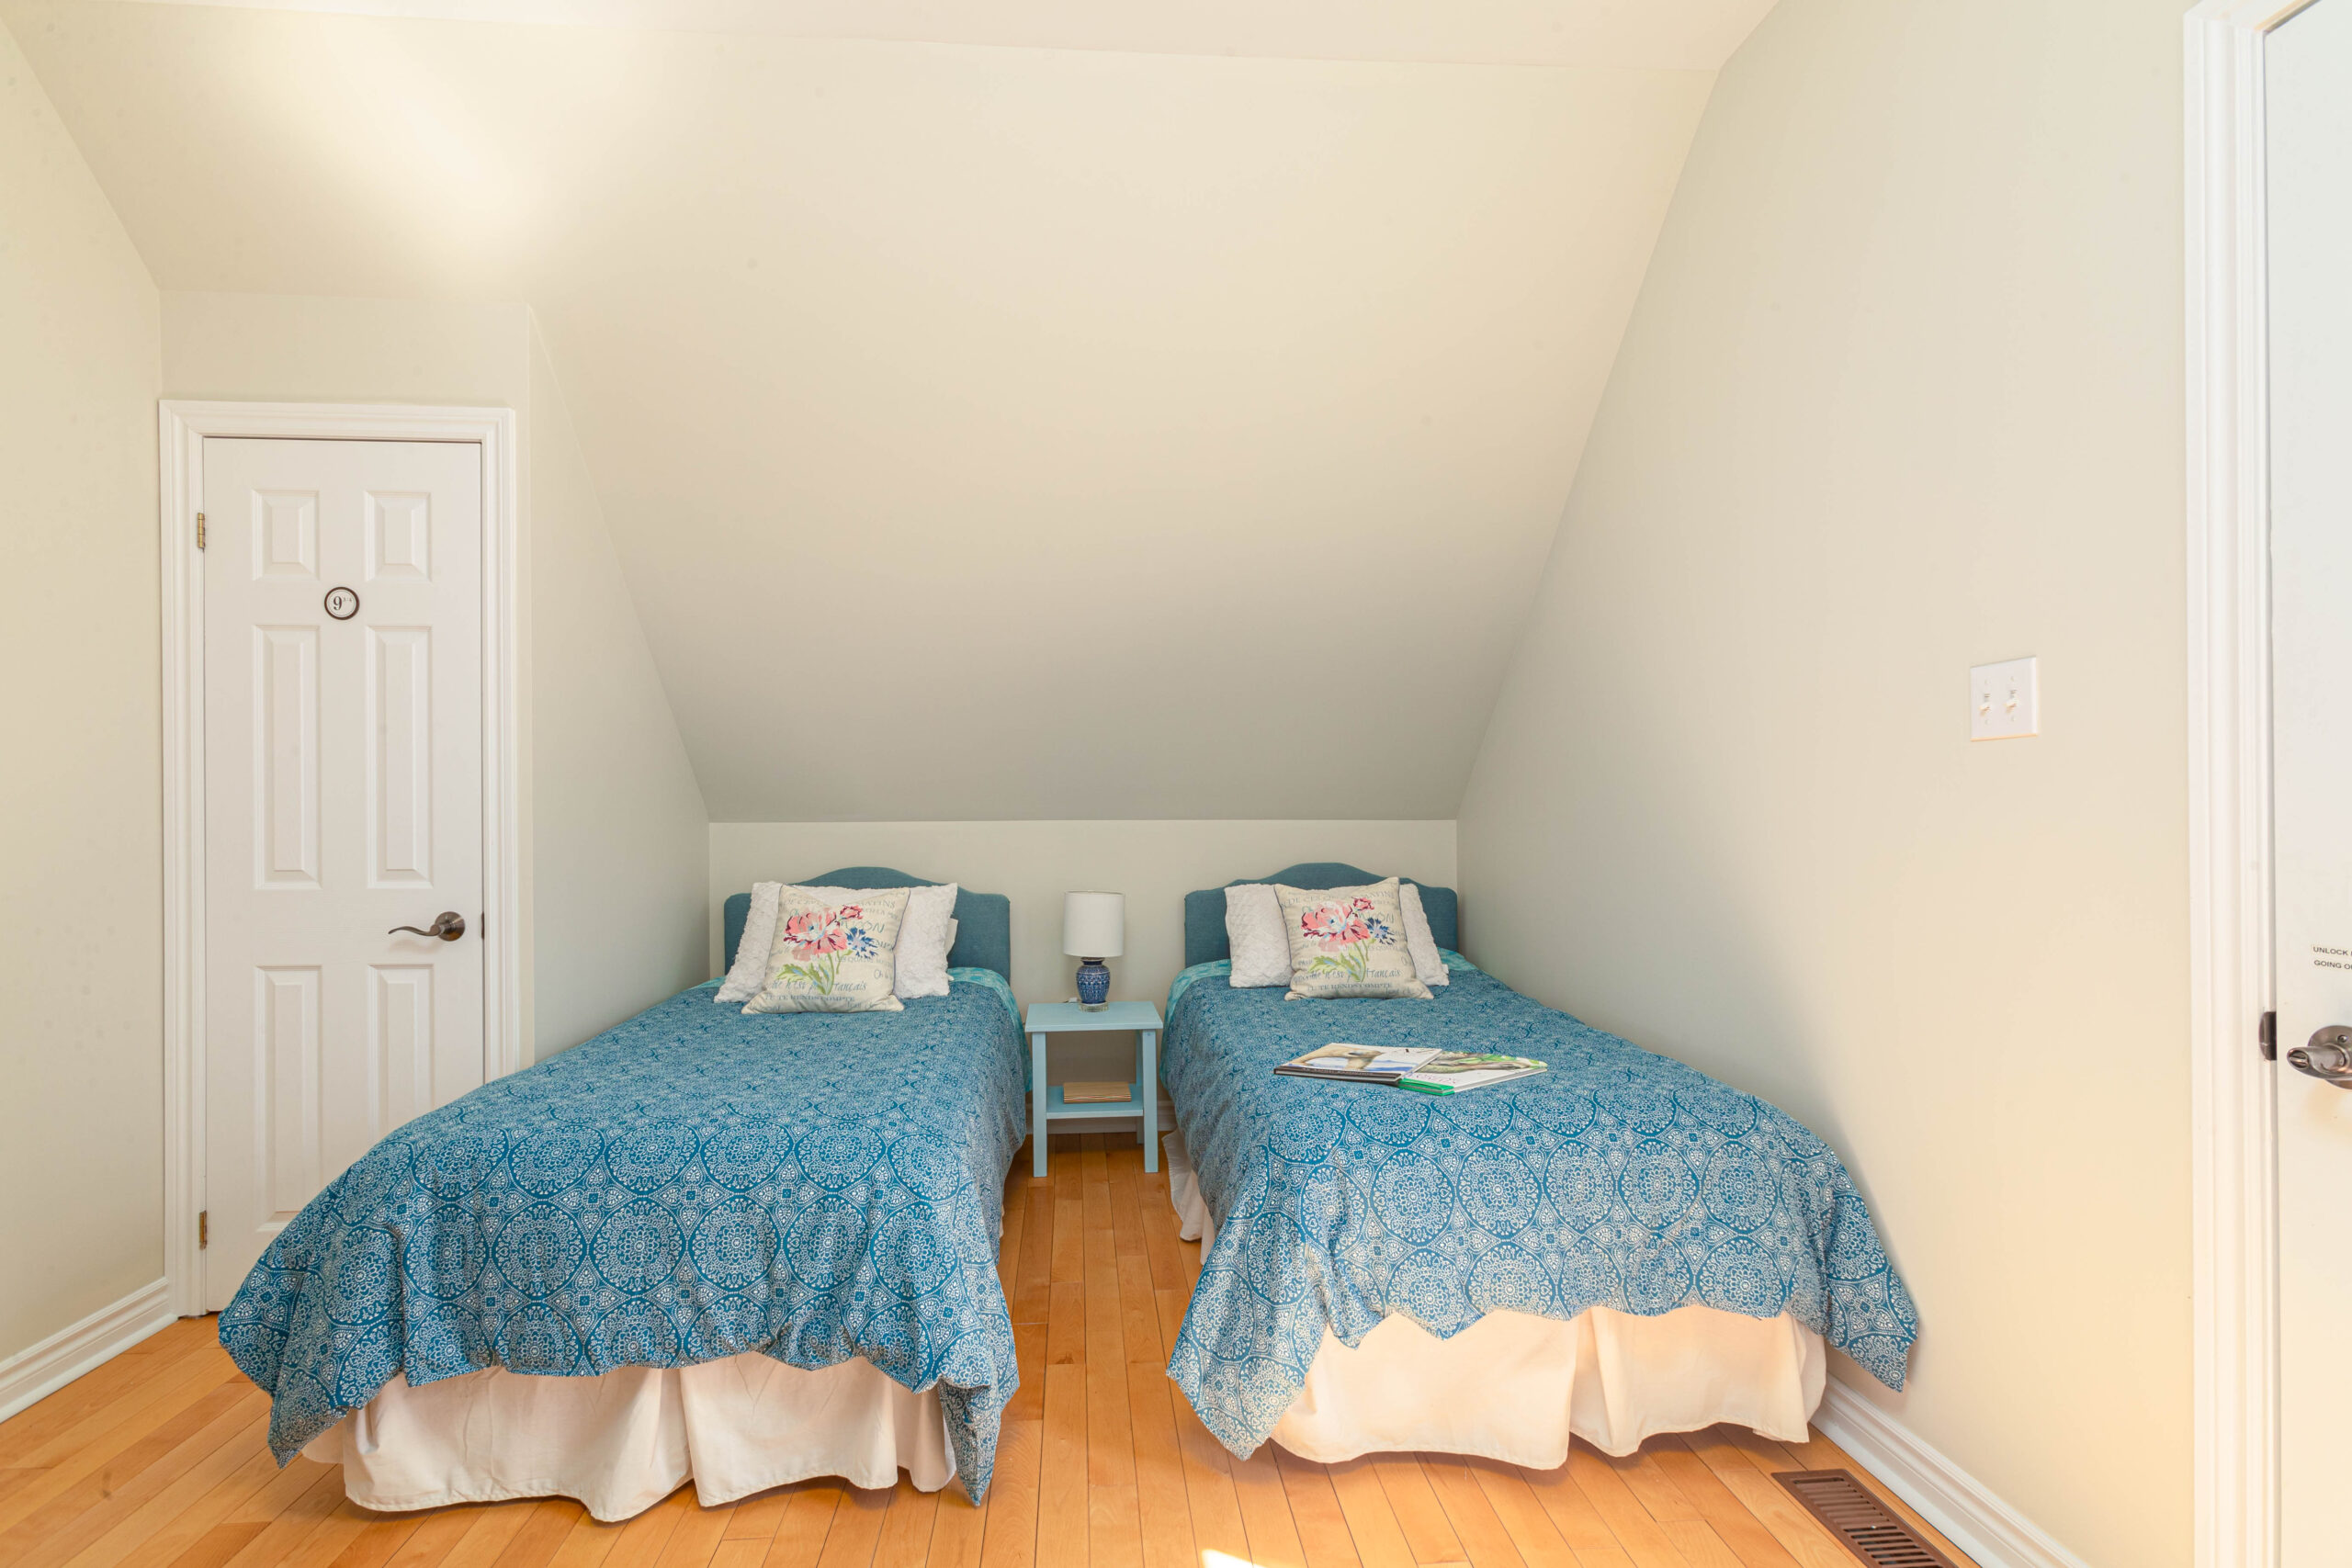 A narrow bedroom with two single beds and a sloping ceiling.